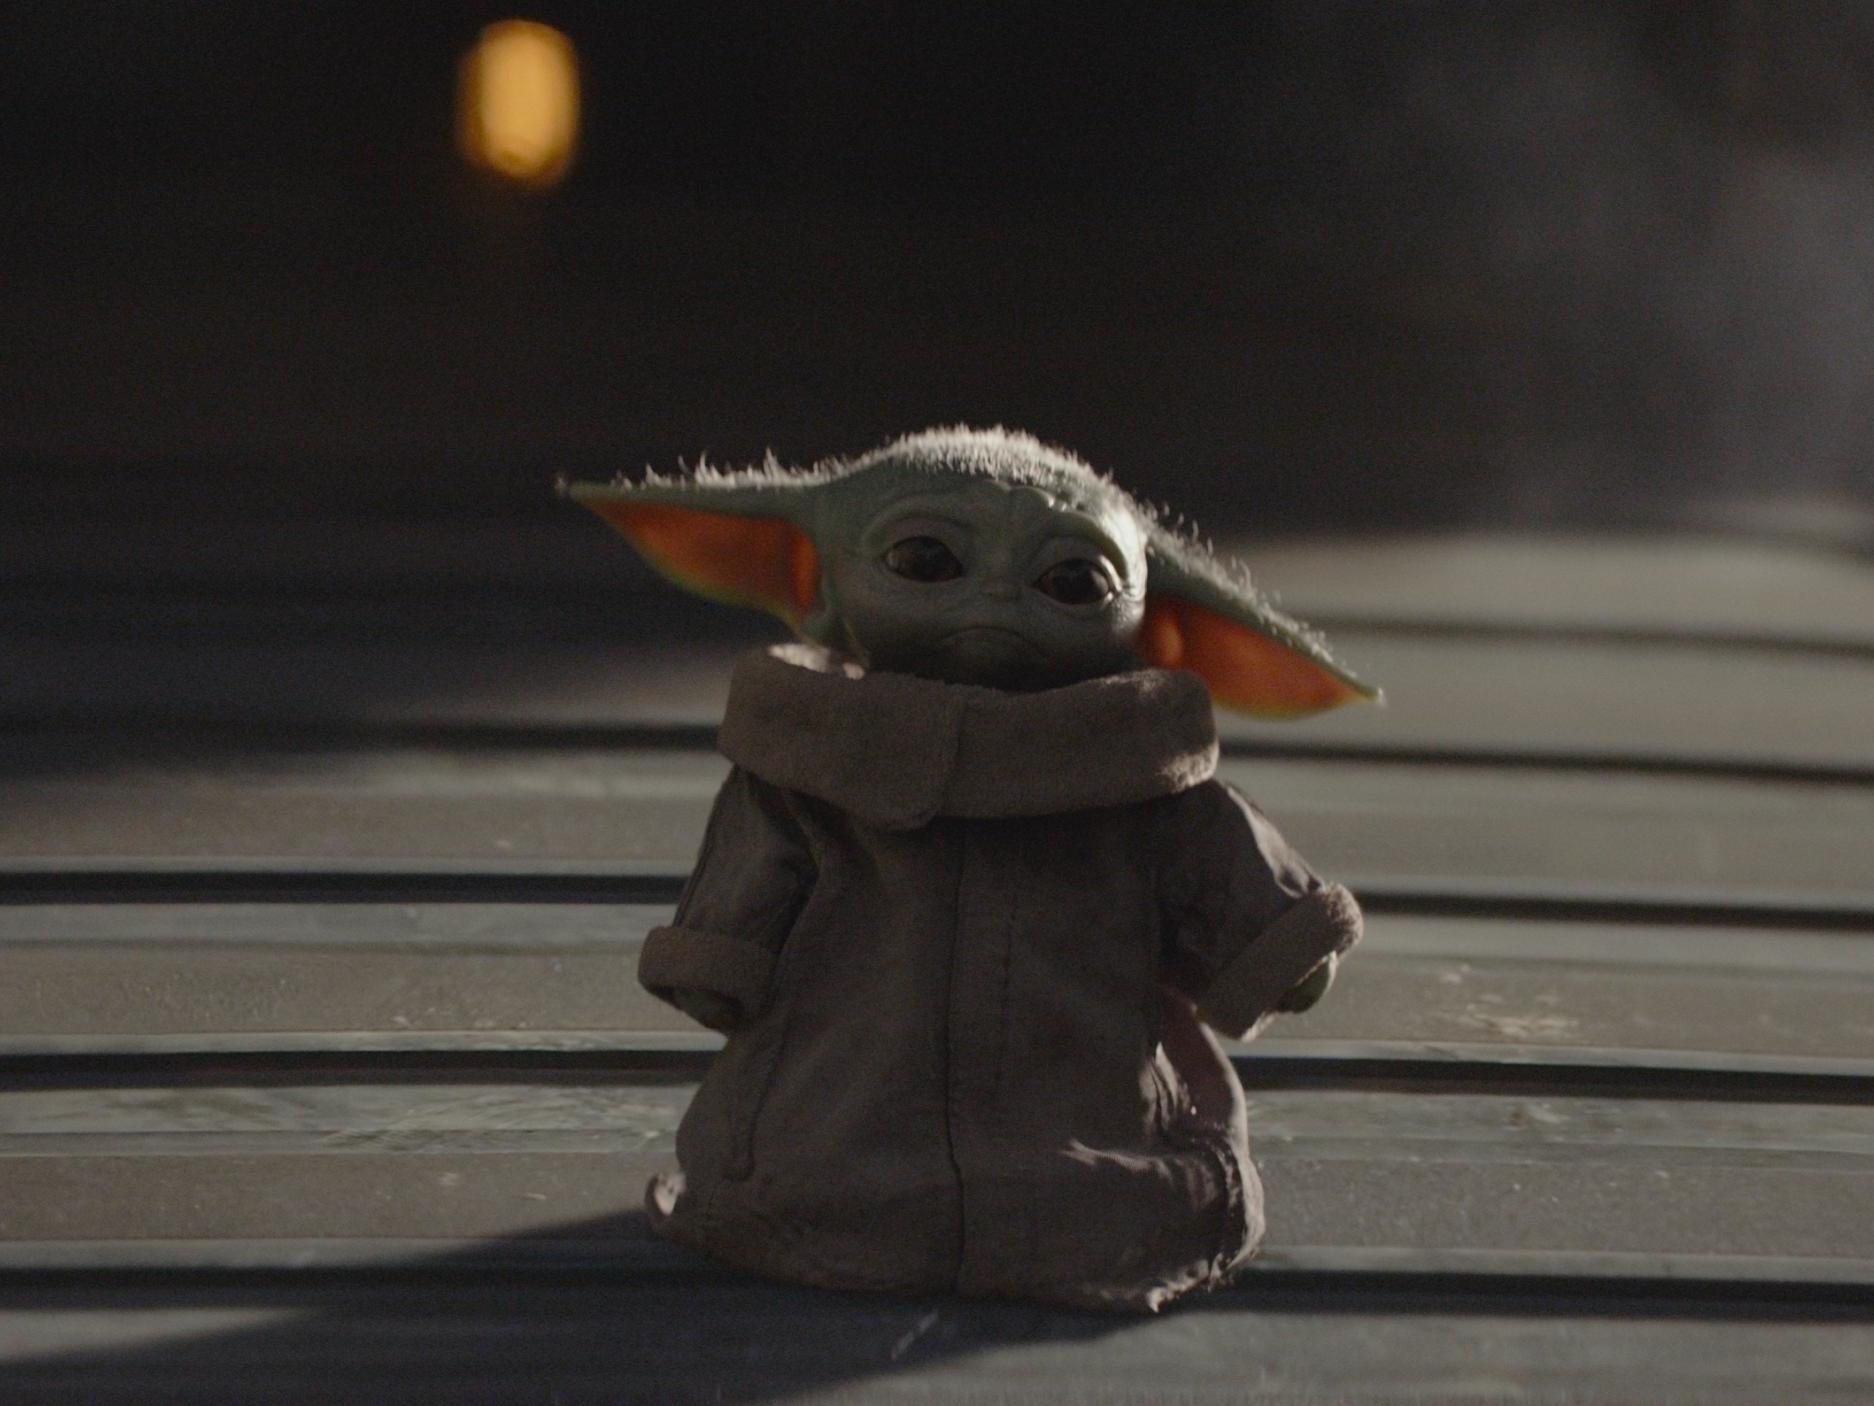 Here Are The 5 Best Official Baby Yoda 'Mandalorian' Toys You Can